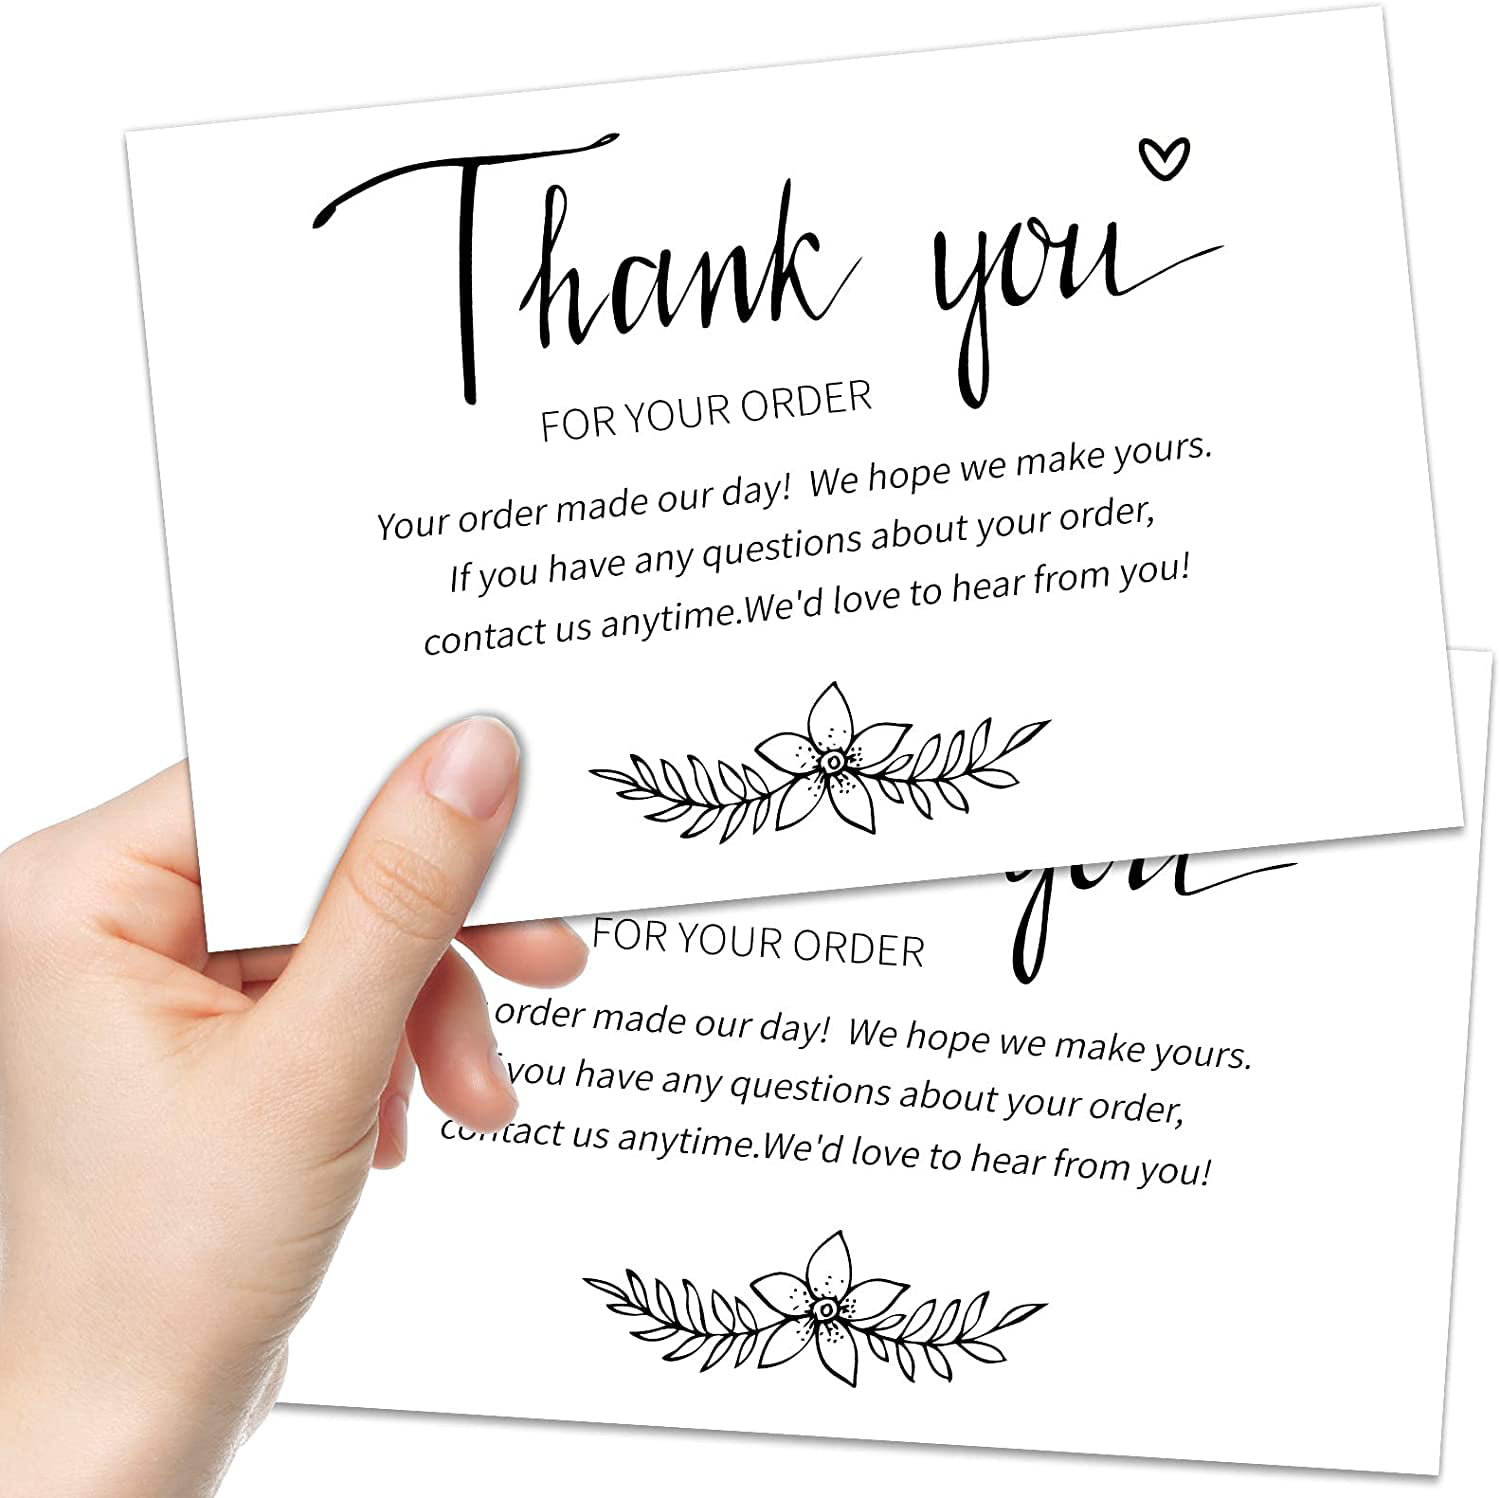 100 Pieces Thank You For Your Order Cards Large 4 X 6 Inch Degradable